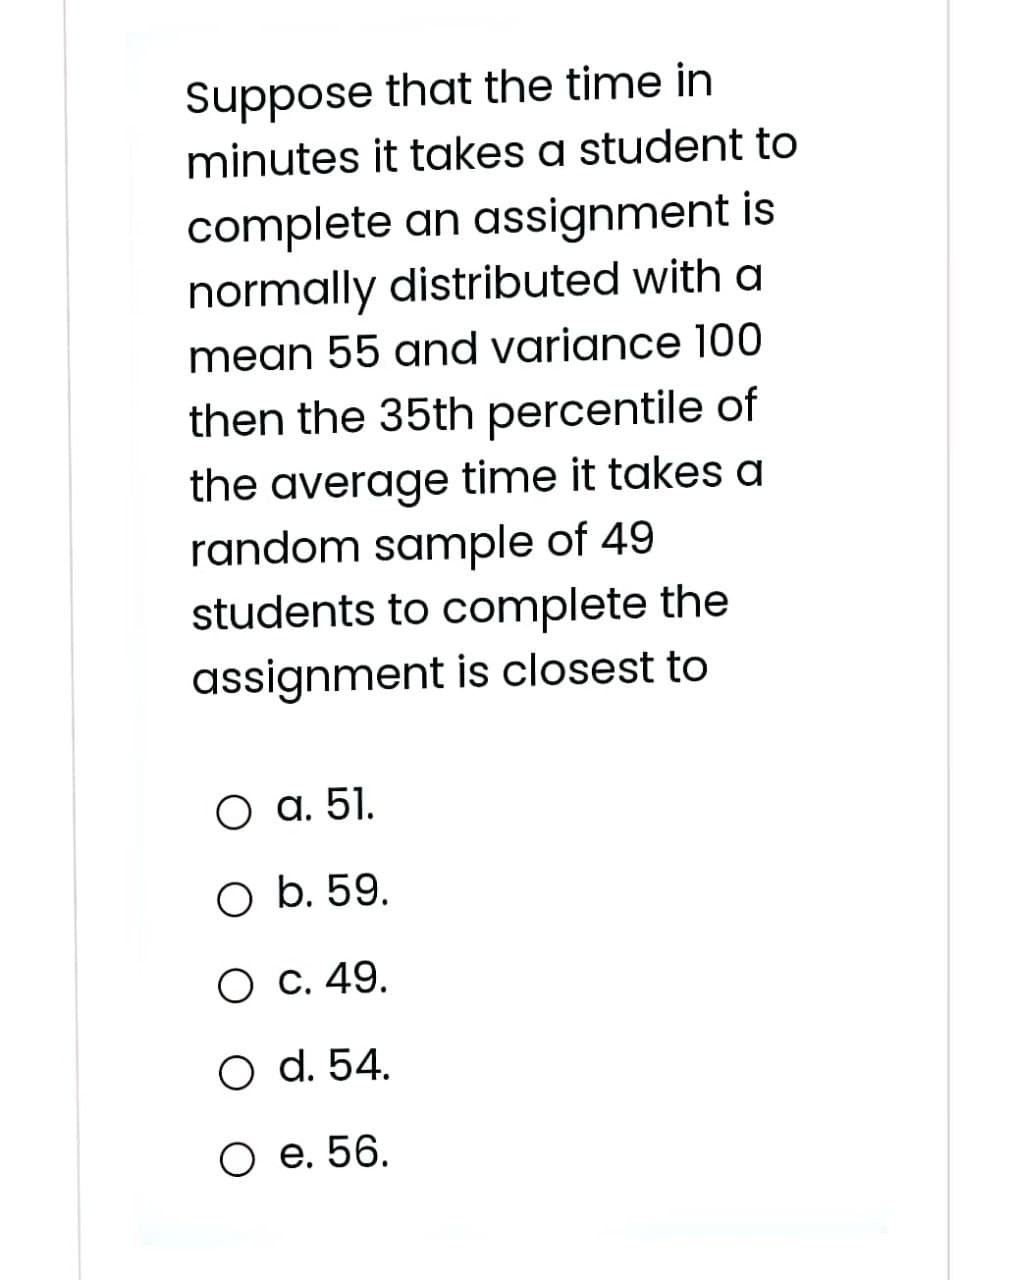 Suppose that the time in
minutes it takes a student to
complete an assignment is
normally distributed with a
mean 55 and variance 100
then the 35th percentile of
the average time it takes a
random sample of 49
students to complete the
assignment is closest to
О а. 51.
O b. 59.
О с. 49.
O d. 54.
О е. 56.
